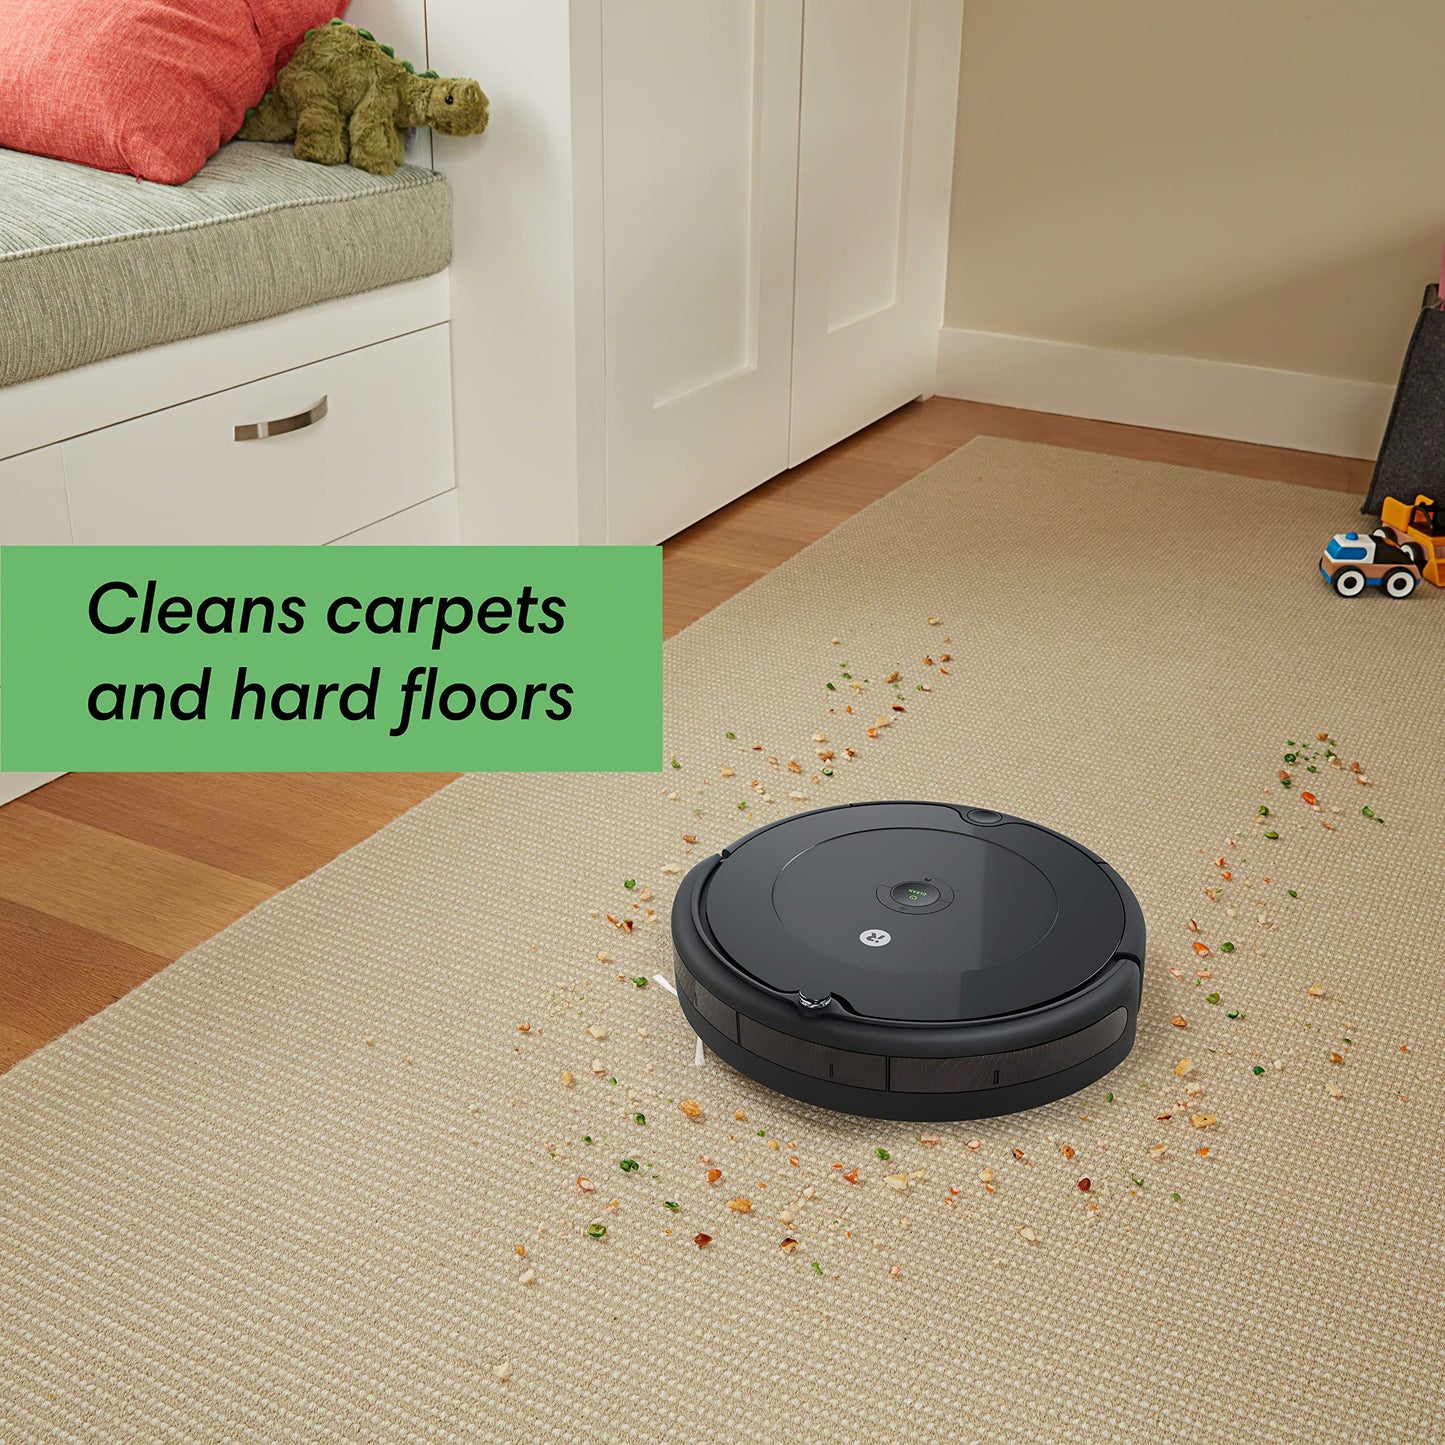 iRobot Roomba 694 Robot Vacuum-Wi-Fi Connectivity, Personalized Cleaning Recommendations, Works with Alexa, Good for Pet Hair, Carpets, Hard Floors, Self-Charging, Roomba 694 - Like New